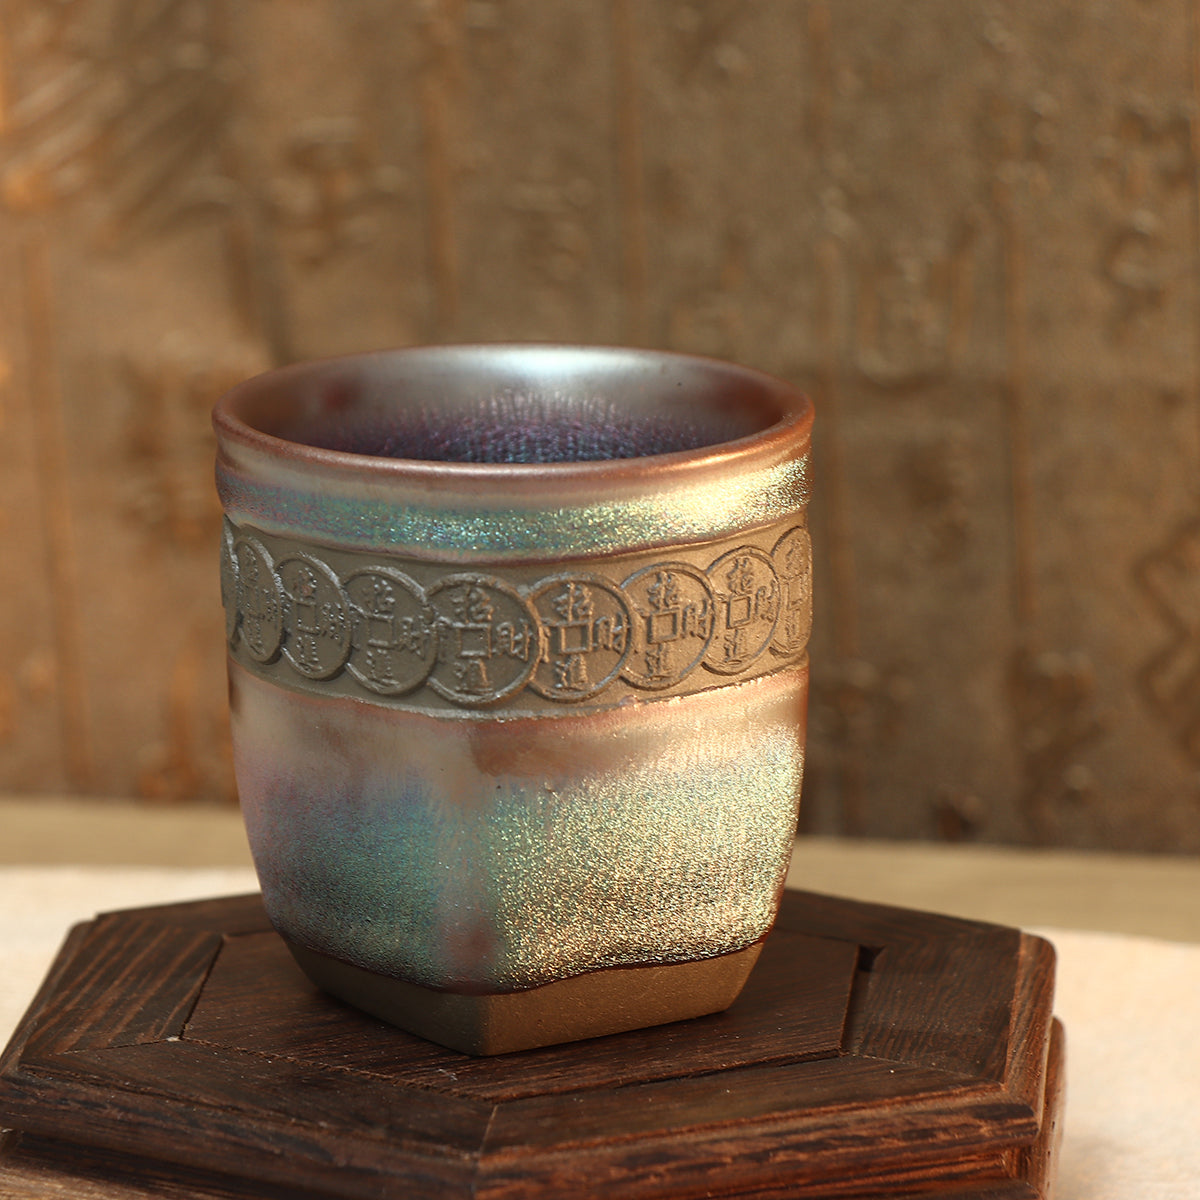 "Coin Cup" Jianzhan Teacup - For Collection&Home Decoration&Tea Enjoyment